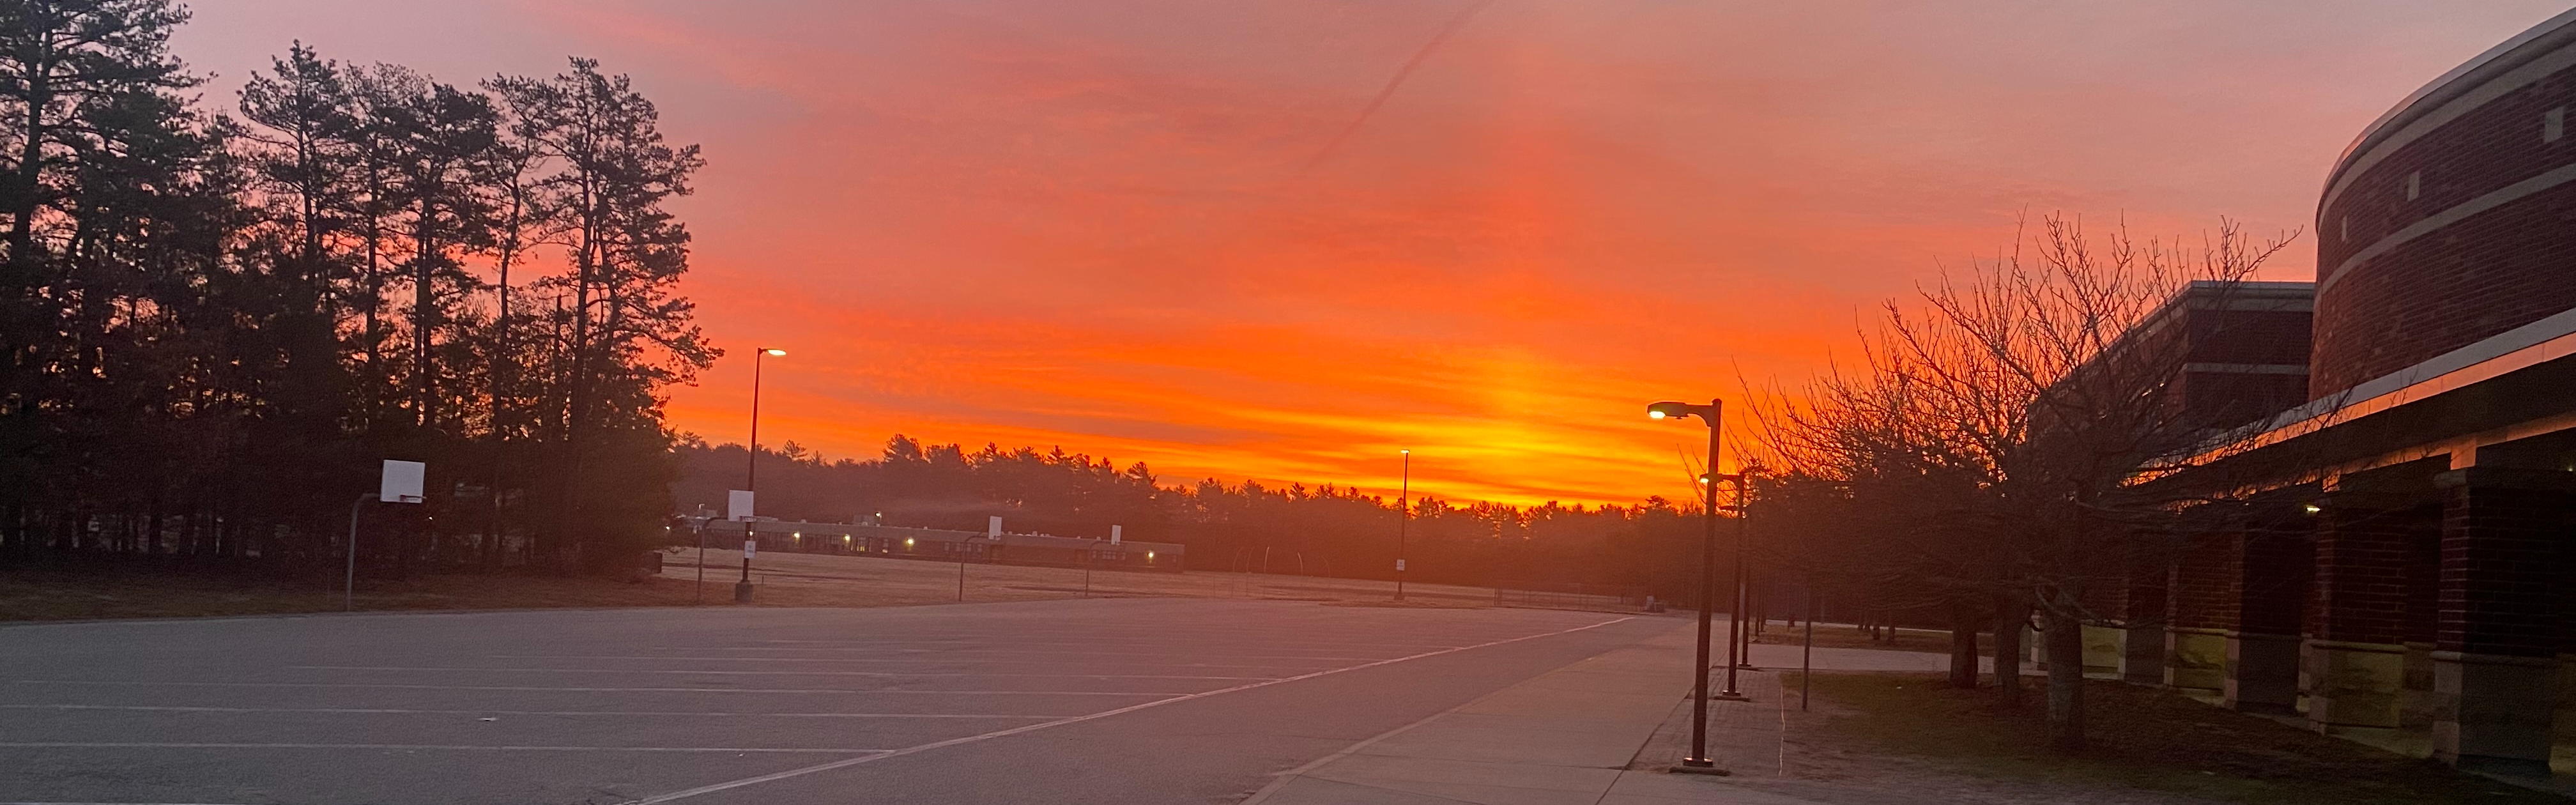 image of a sunrise over the parking lot